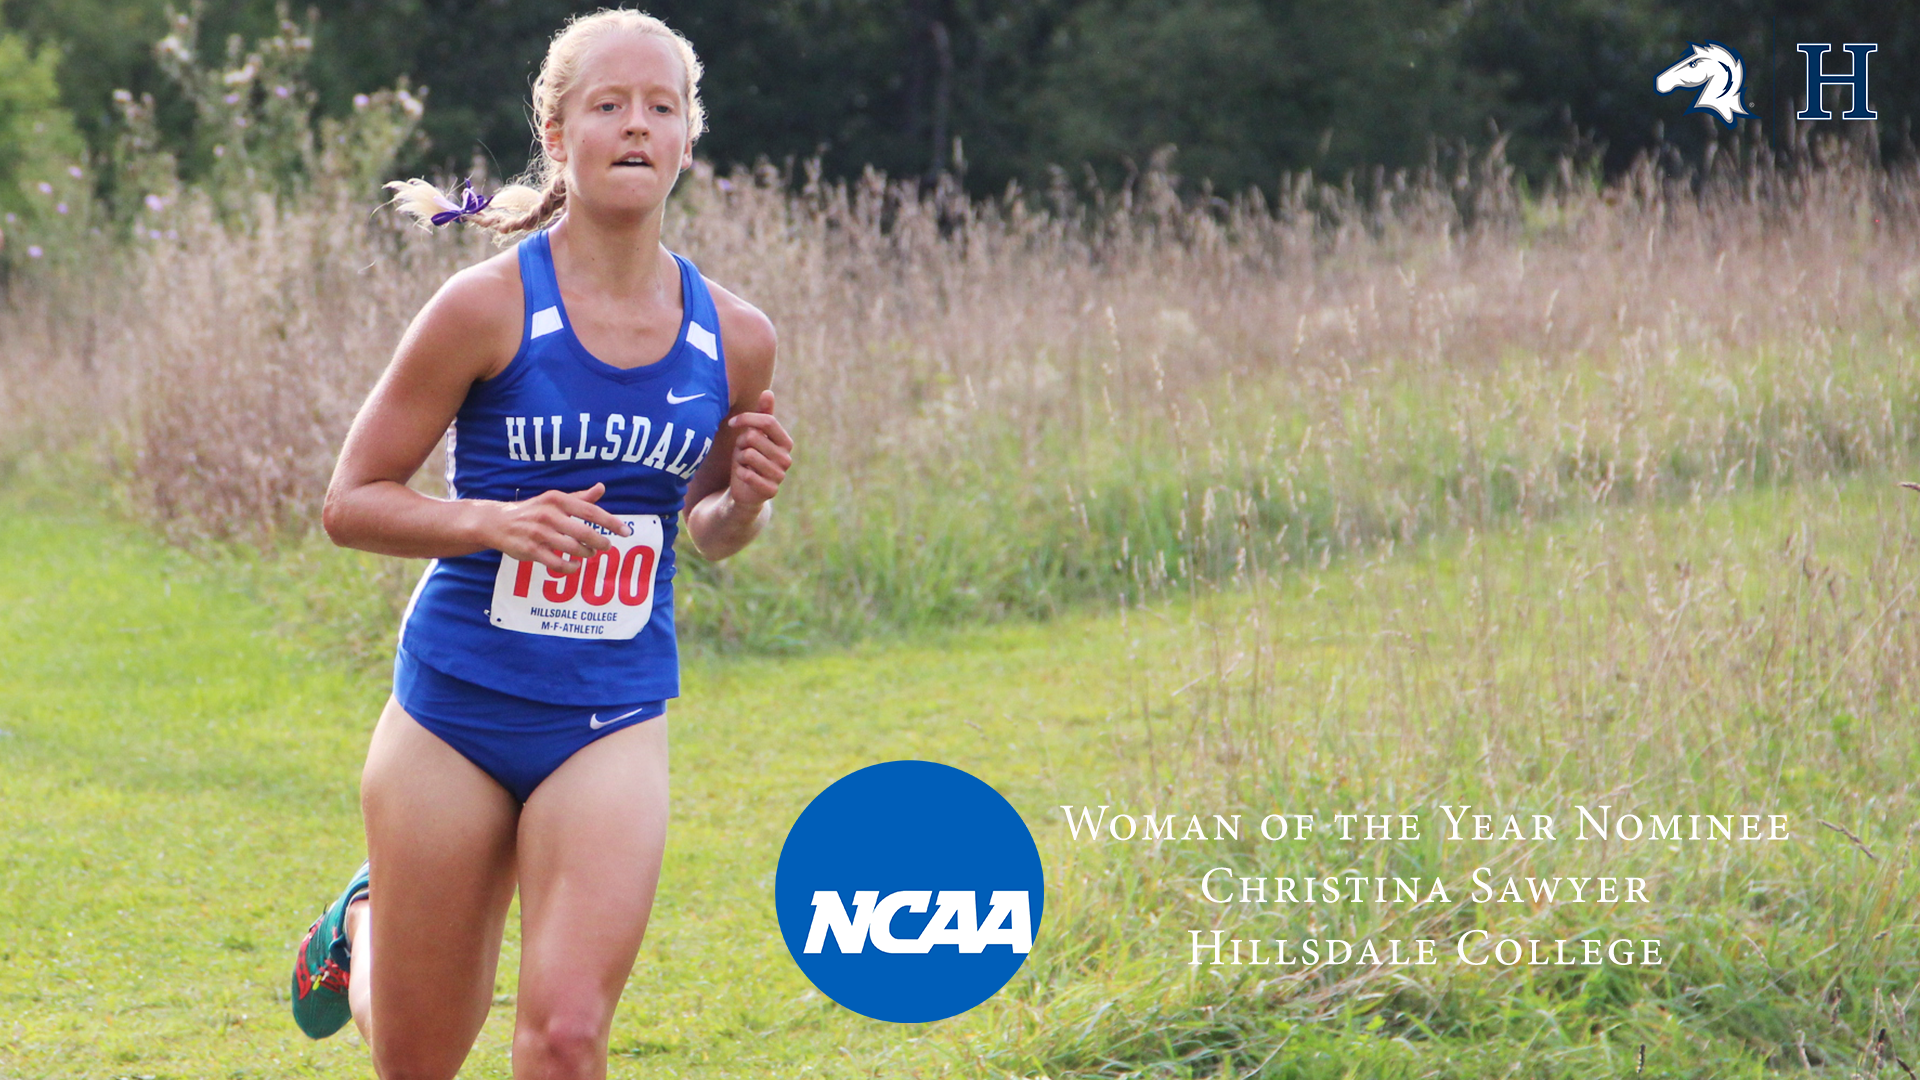 Hillsdale College’s Christina Sawyer nominated for NCAA Woman of the Year Award